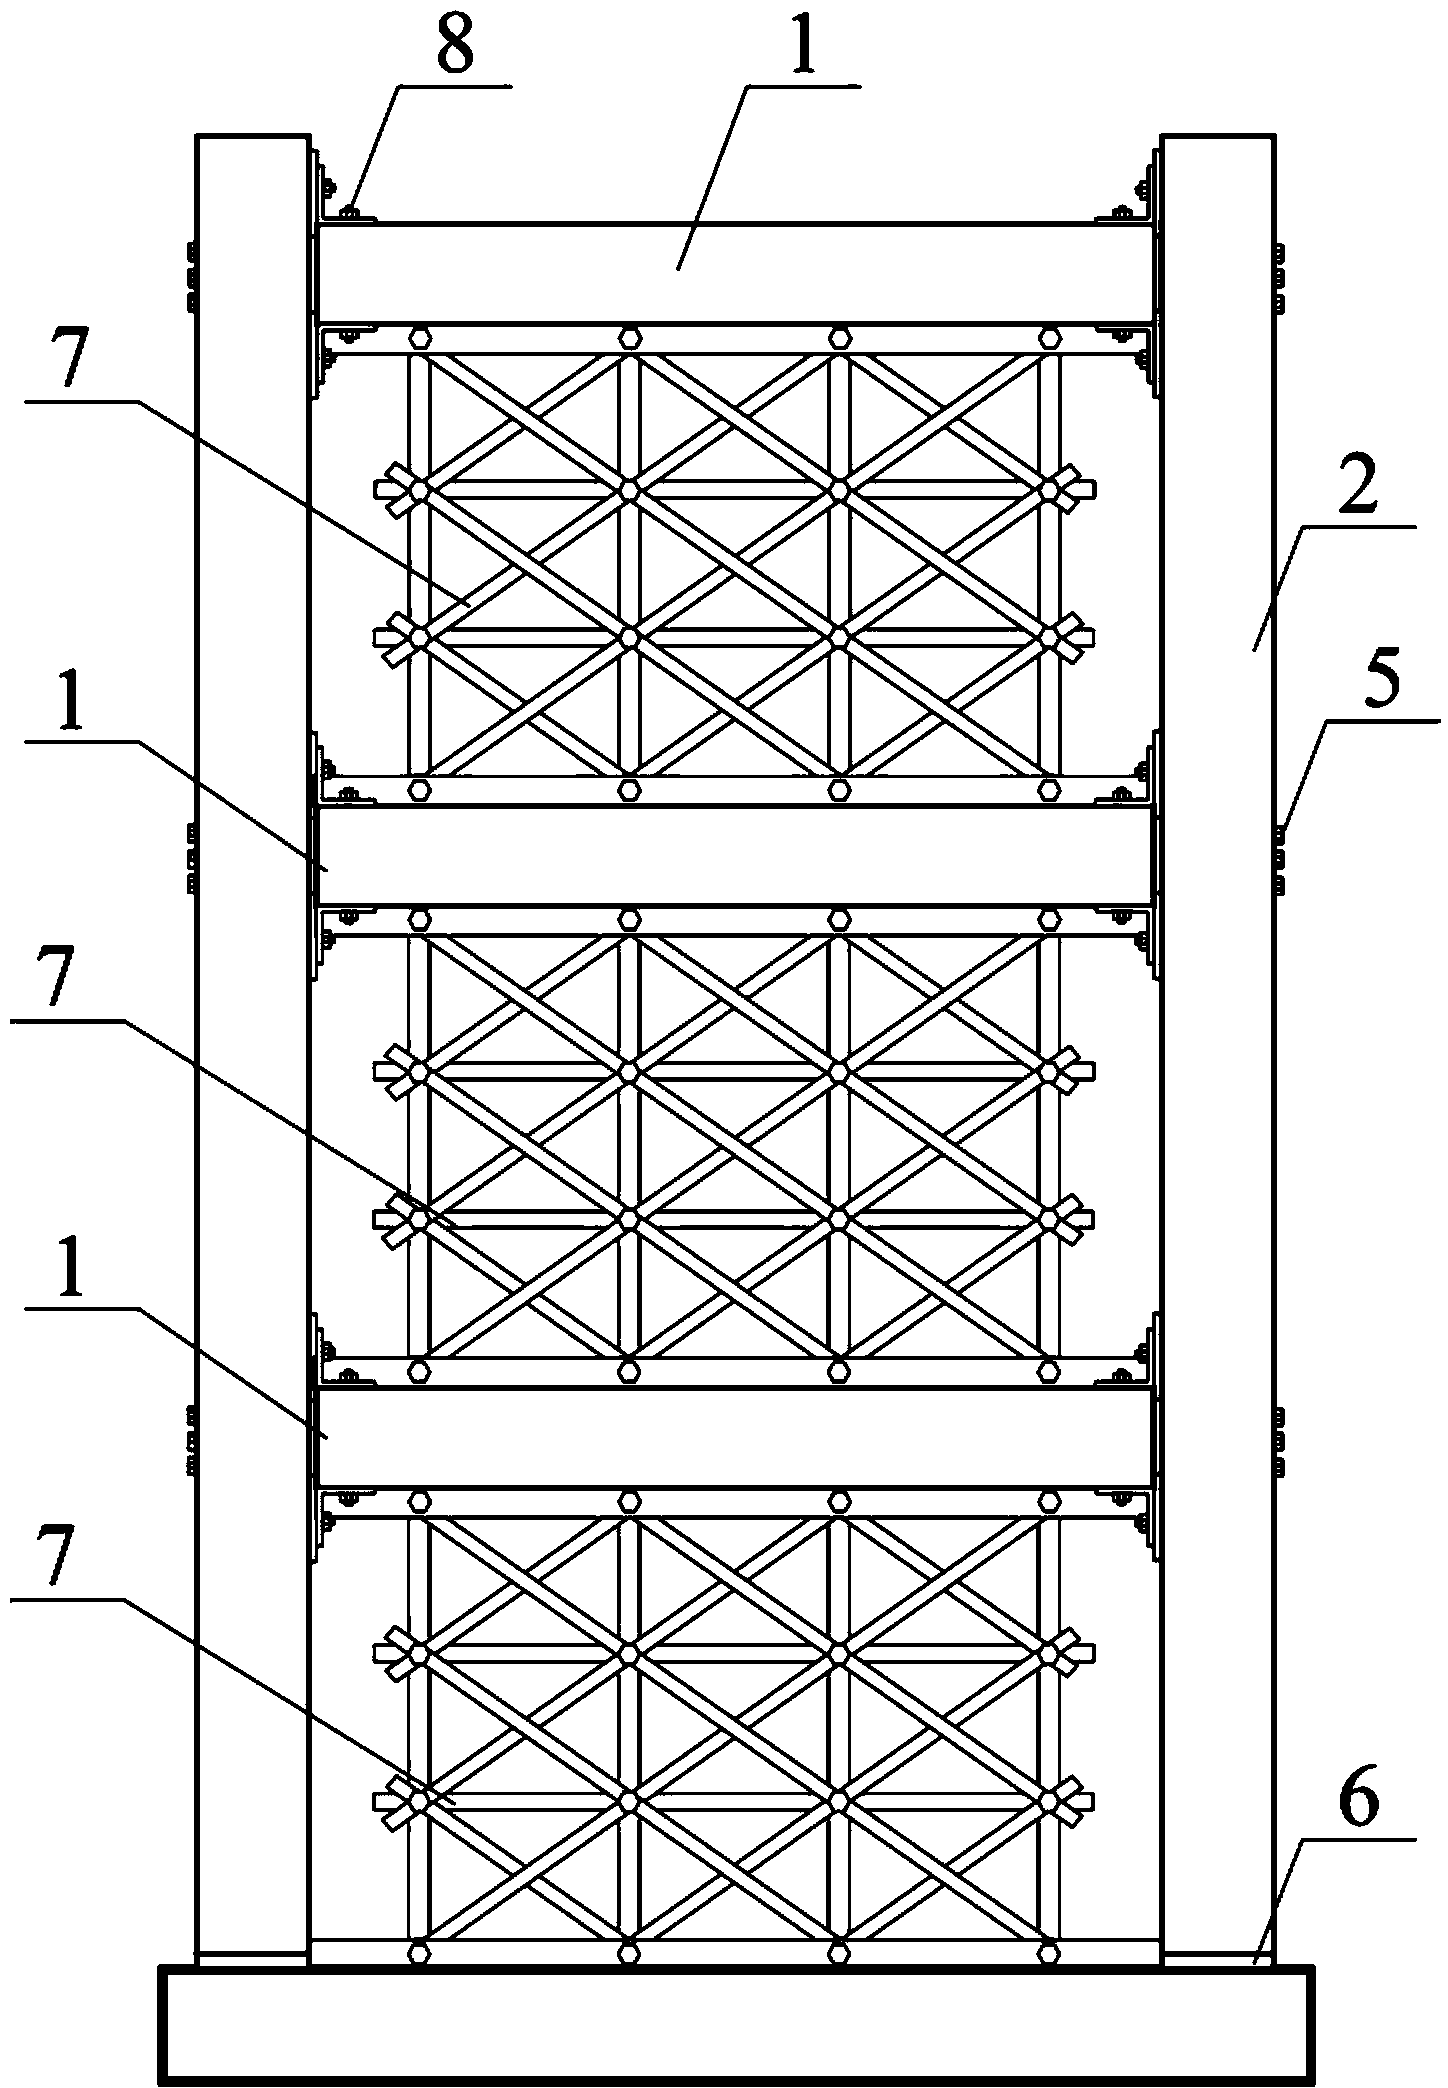 Self-reset girder-grid friction wall structural system